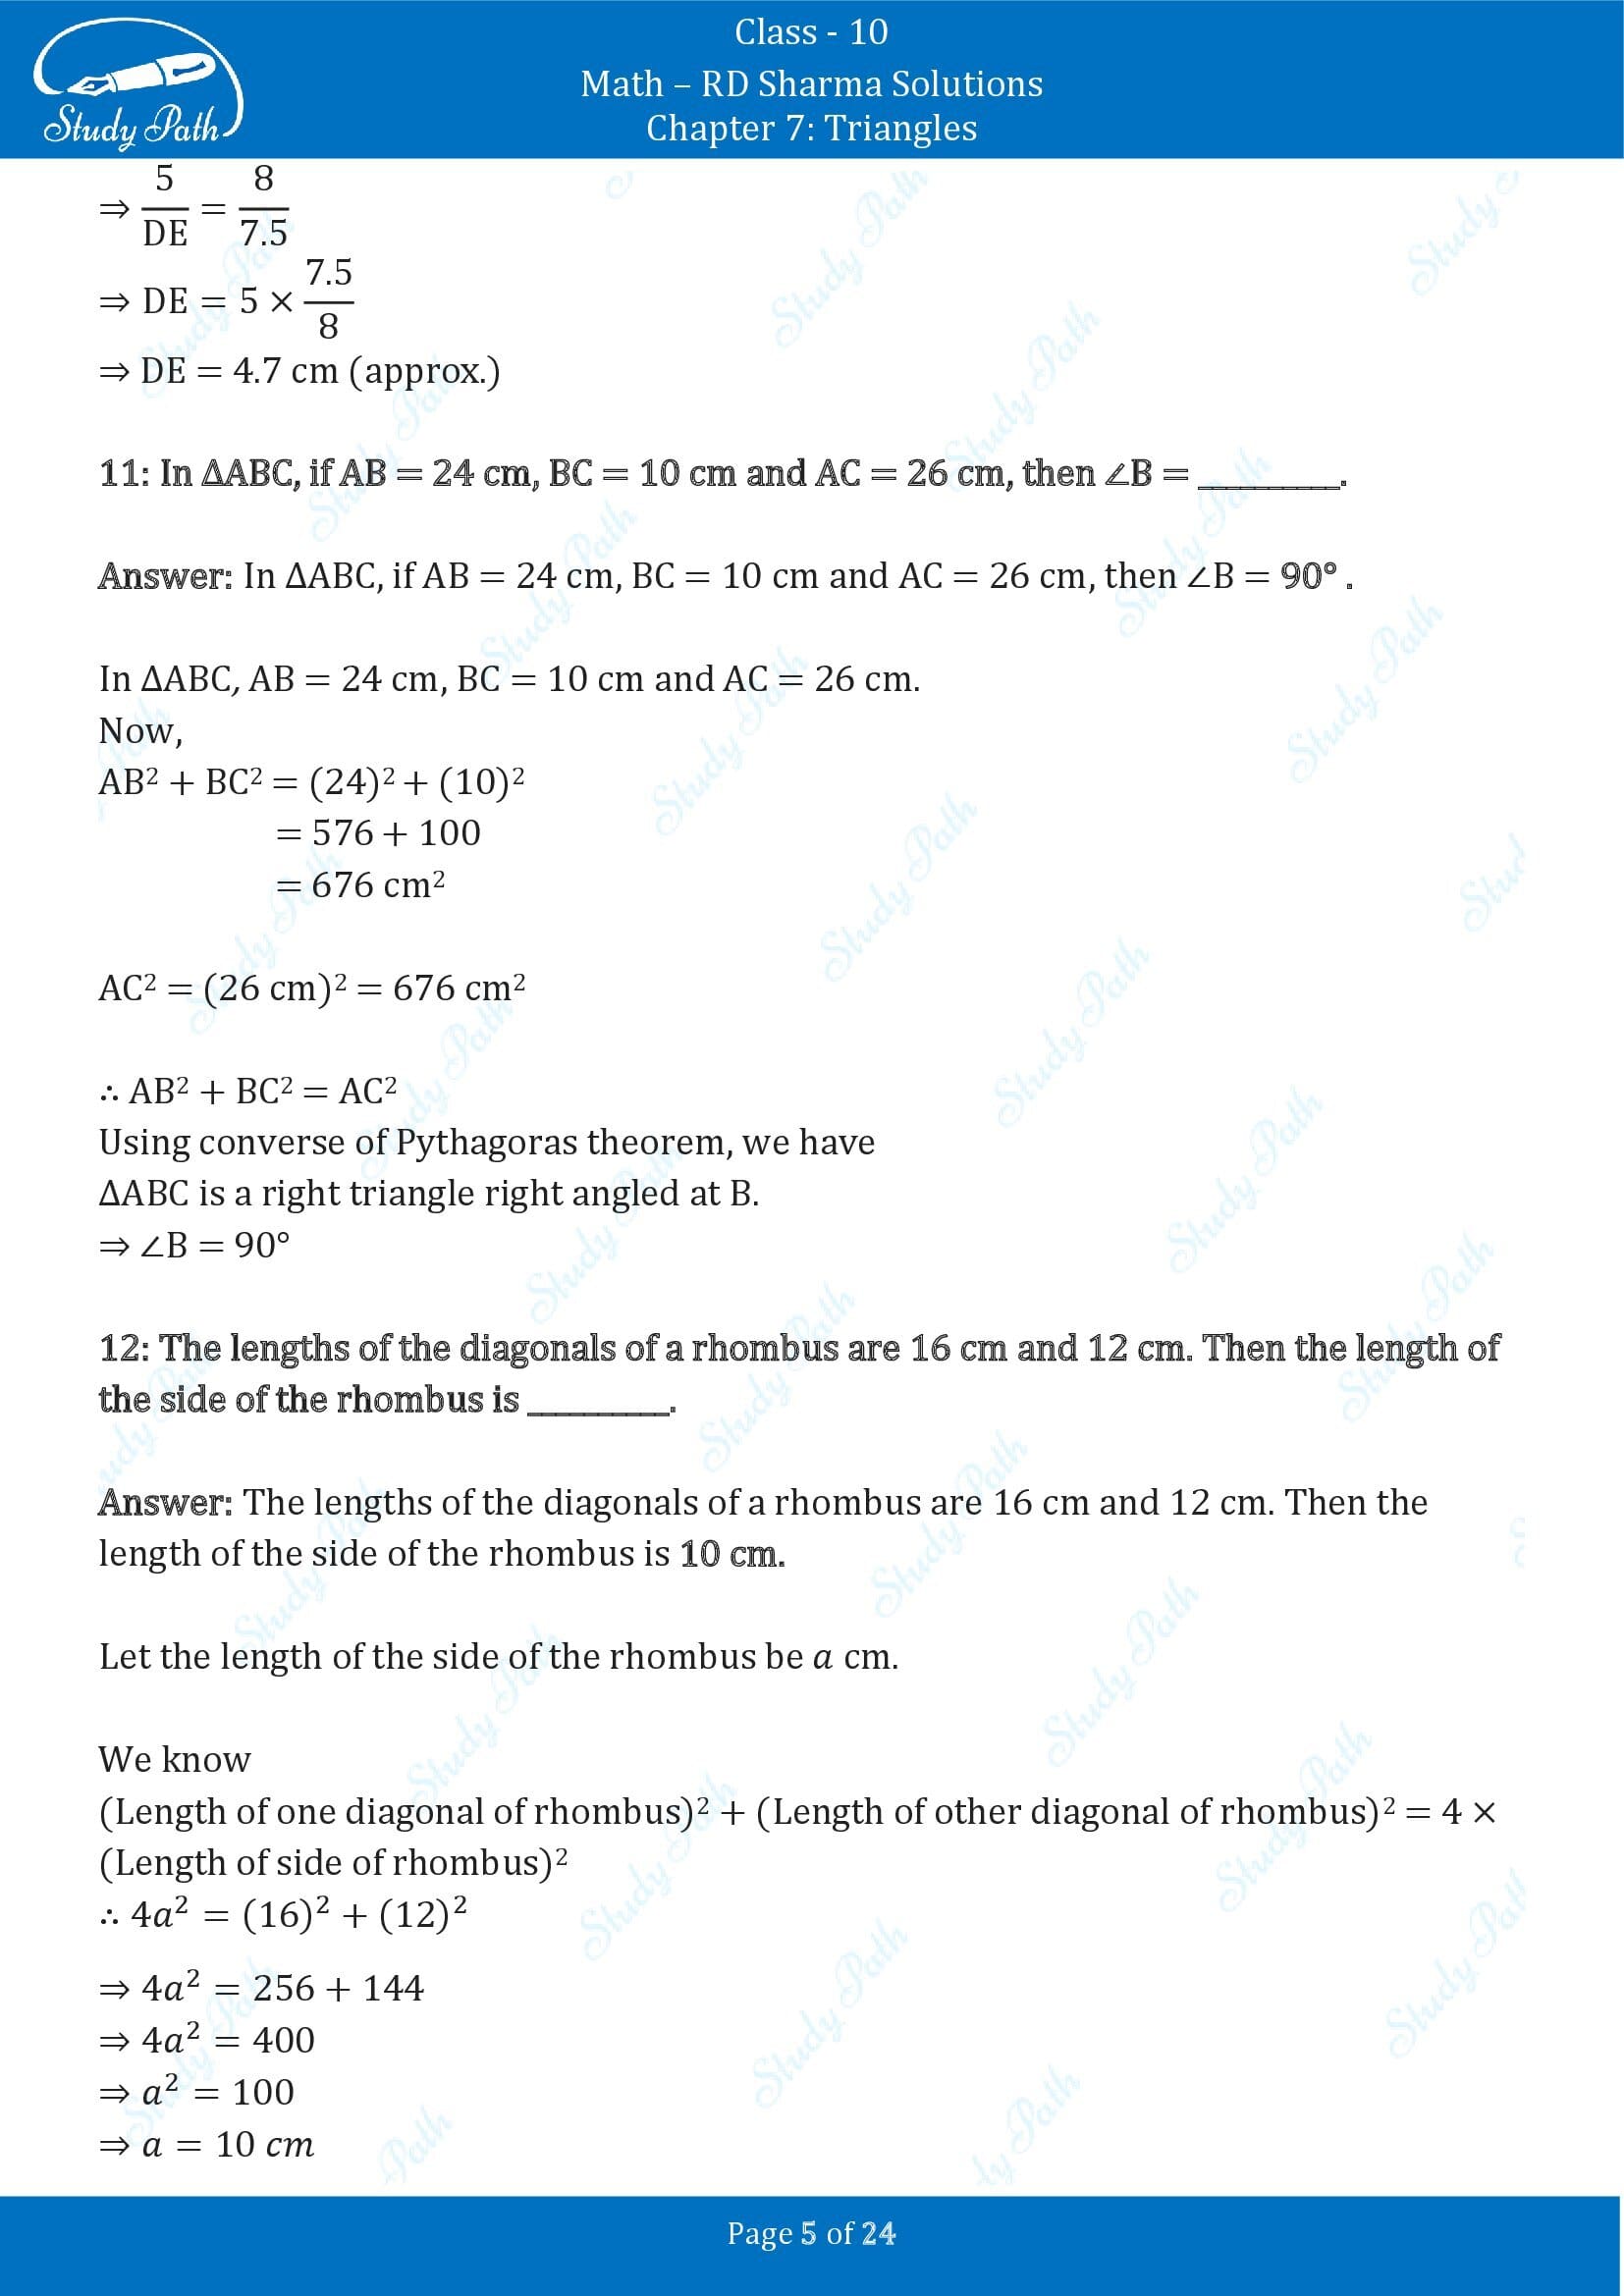 RD Sharma Solutions Class 10 Chapter 7 Triangles Fill in the Blank Type Questions FBQs 00005